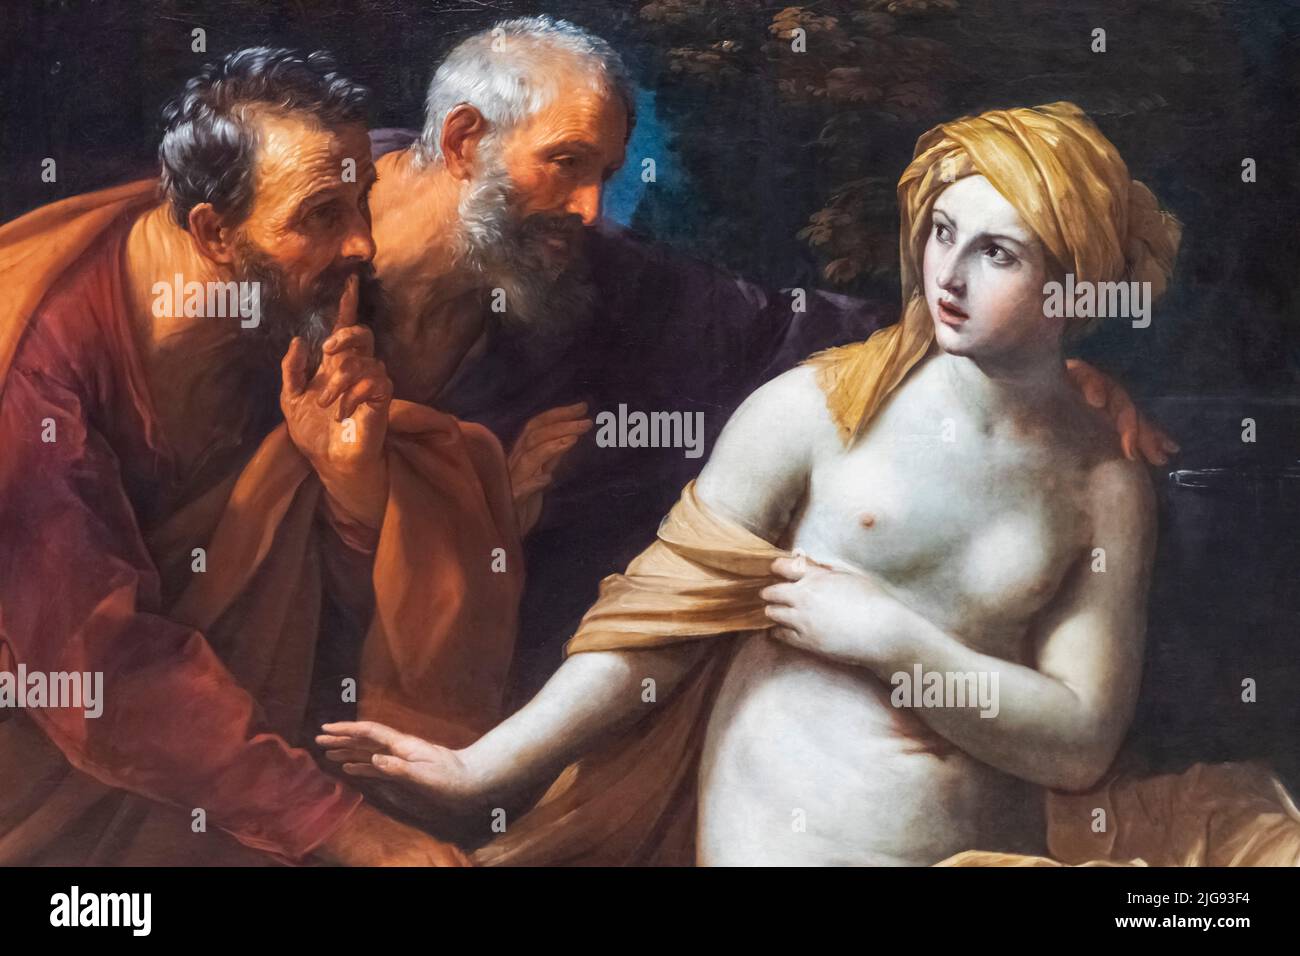 Painting titled 'Susannah and the Elders' by Italian Artist Guido Reni dated 1620 Stock Photo